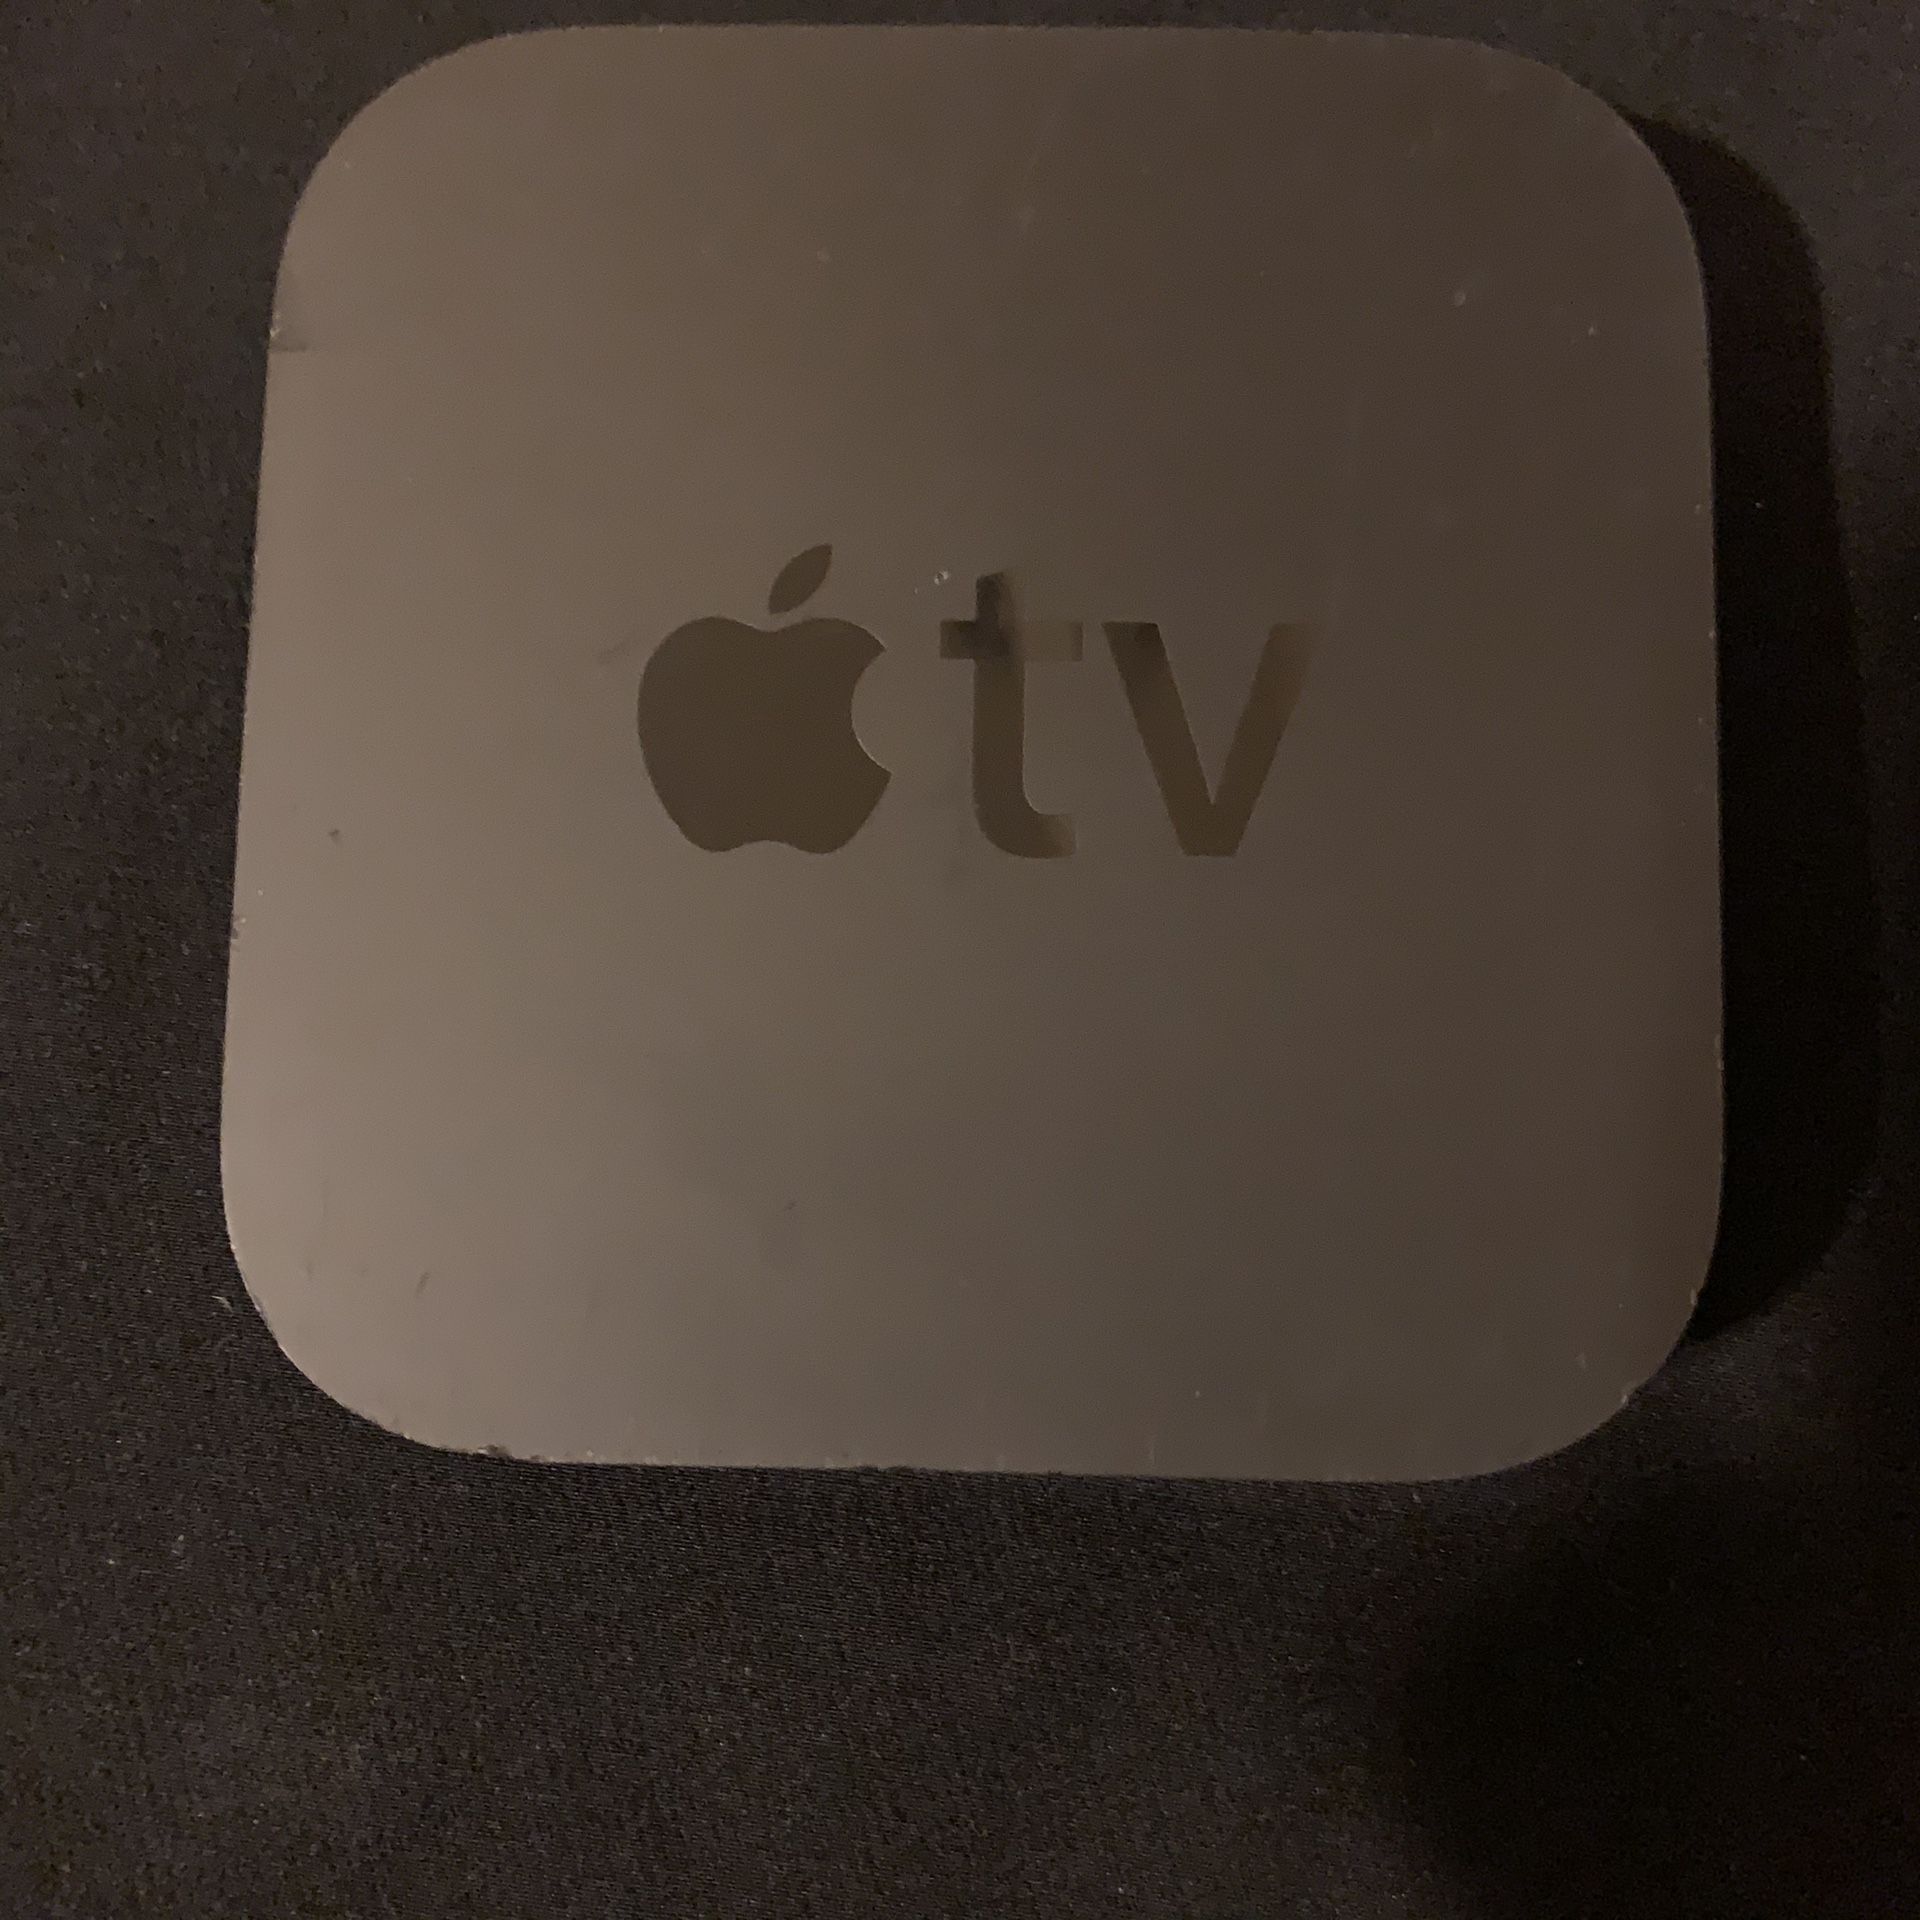 Apple TV in Great Condition Normal Wear for Sale